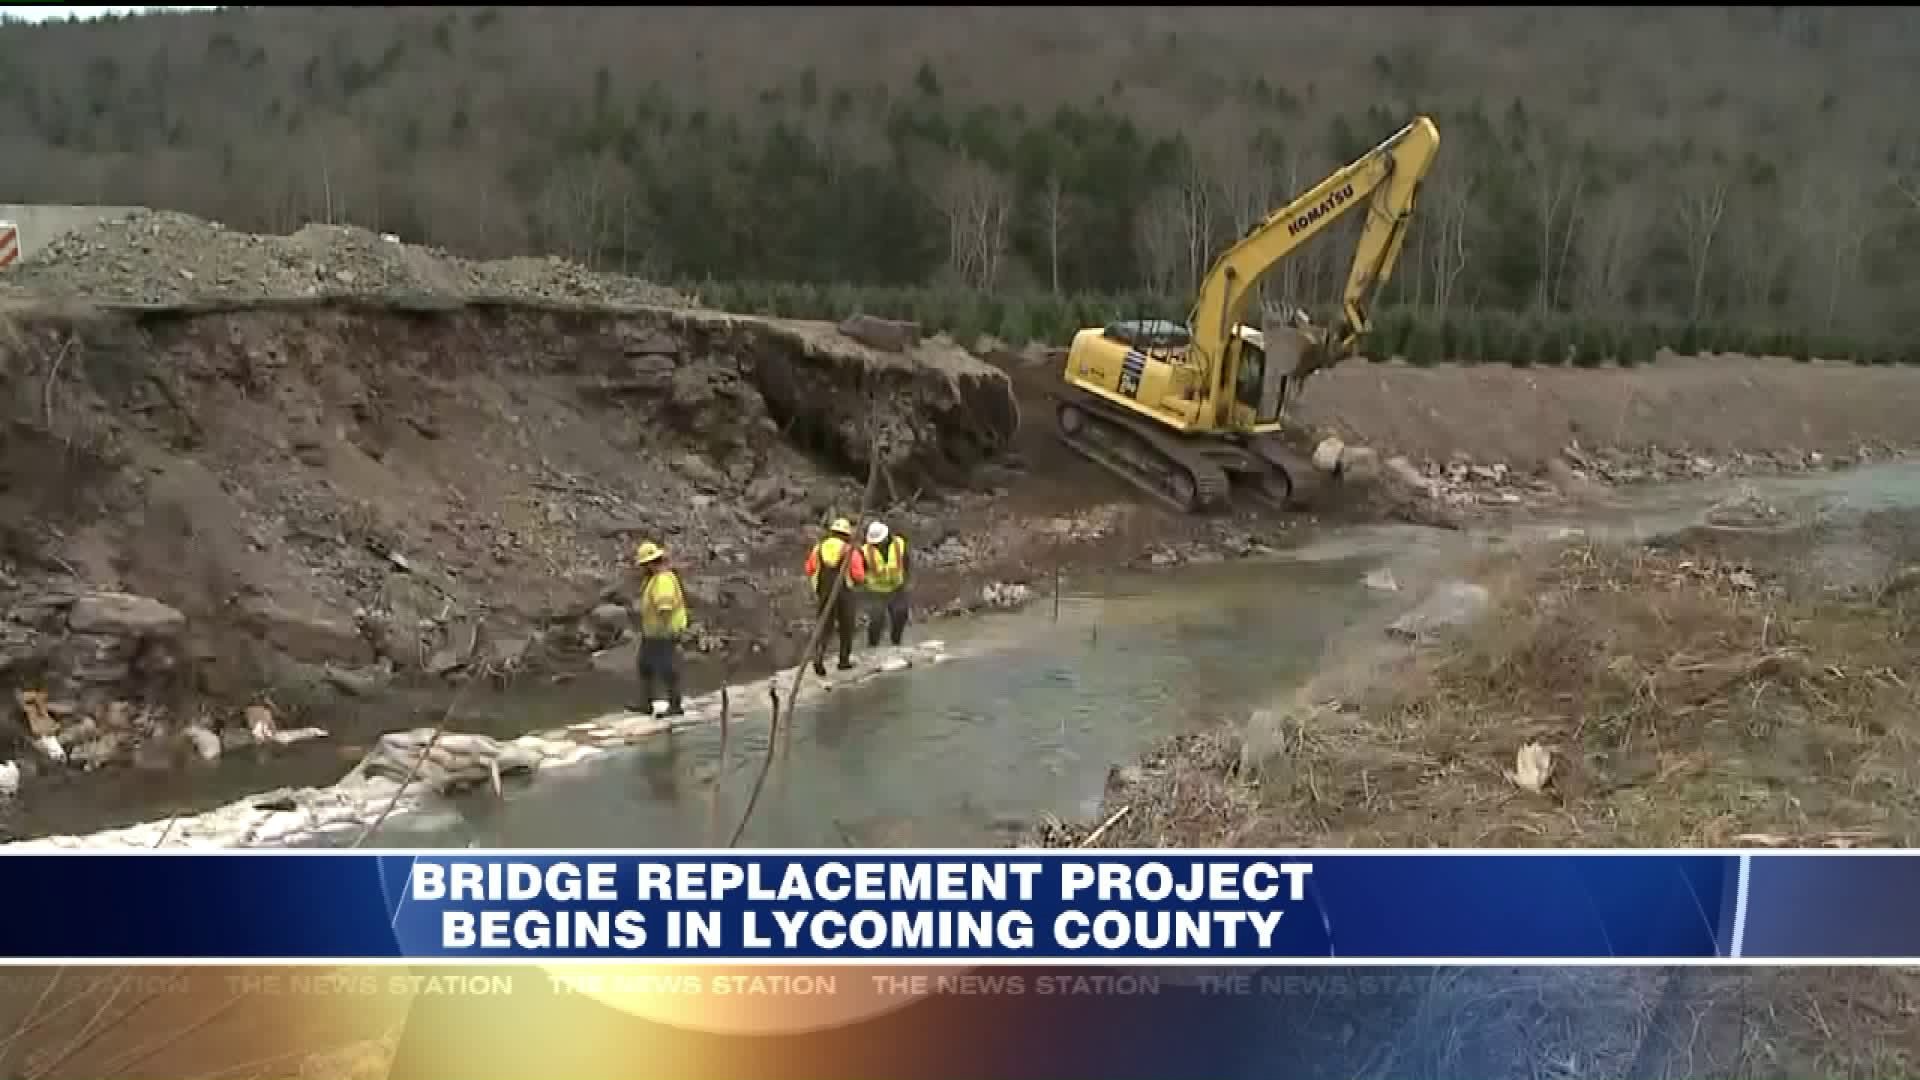 Bridge Replacement Project to Begin in Lycoming County